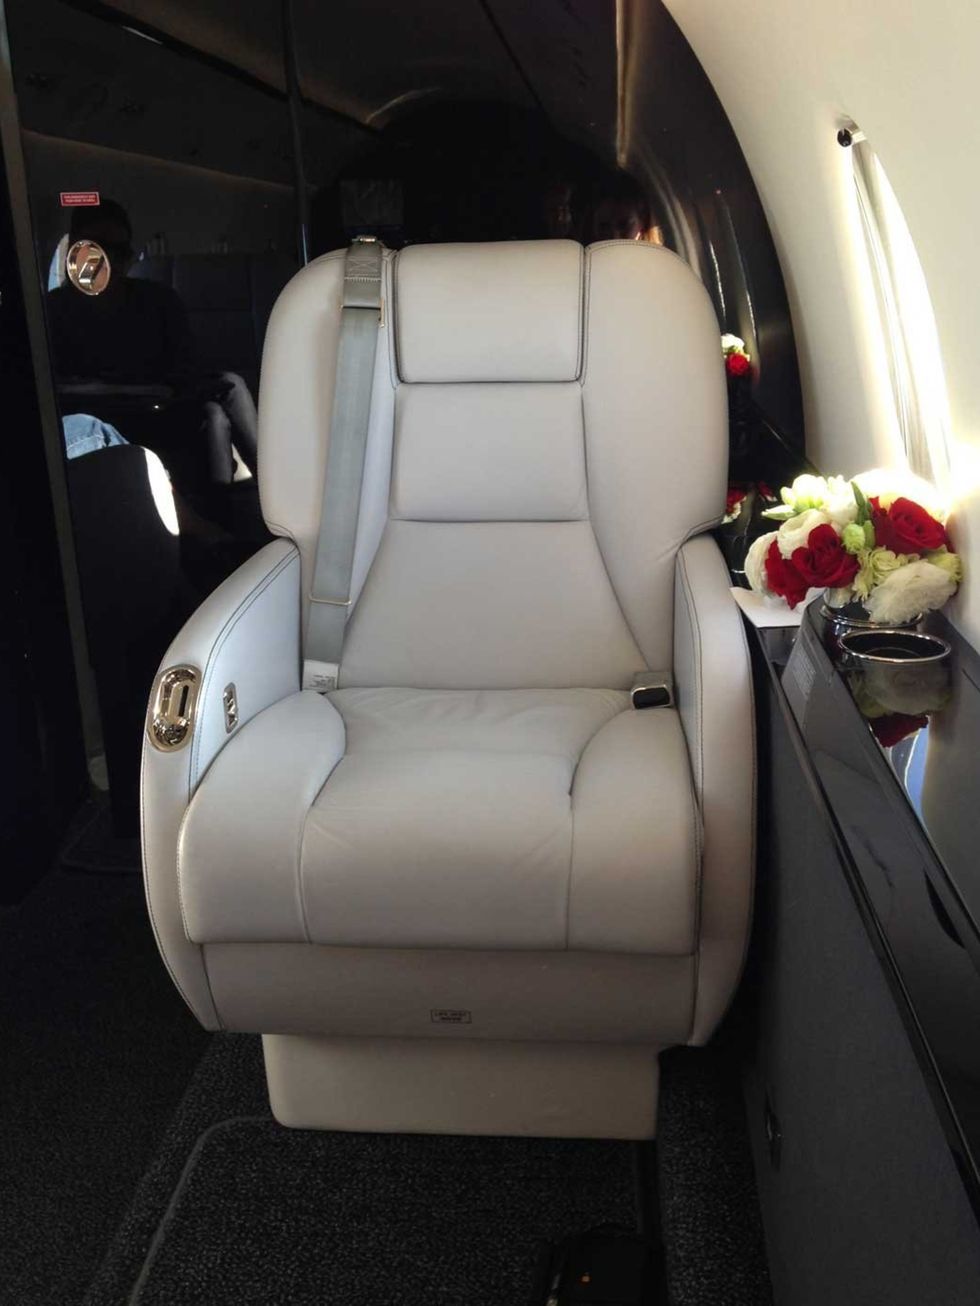 <p>White leather chairs on swivel settings - the seats on offer when travelling by private jet. The red rose posies were a nice touch too. Easyjet, eat your heart out.</p>